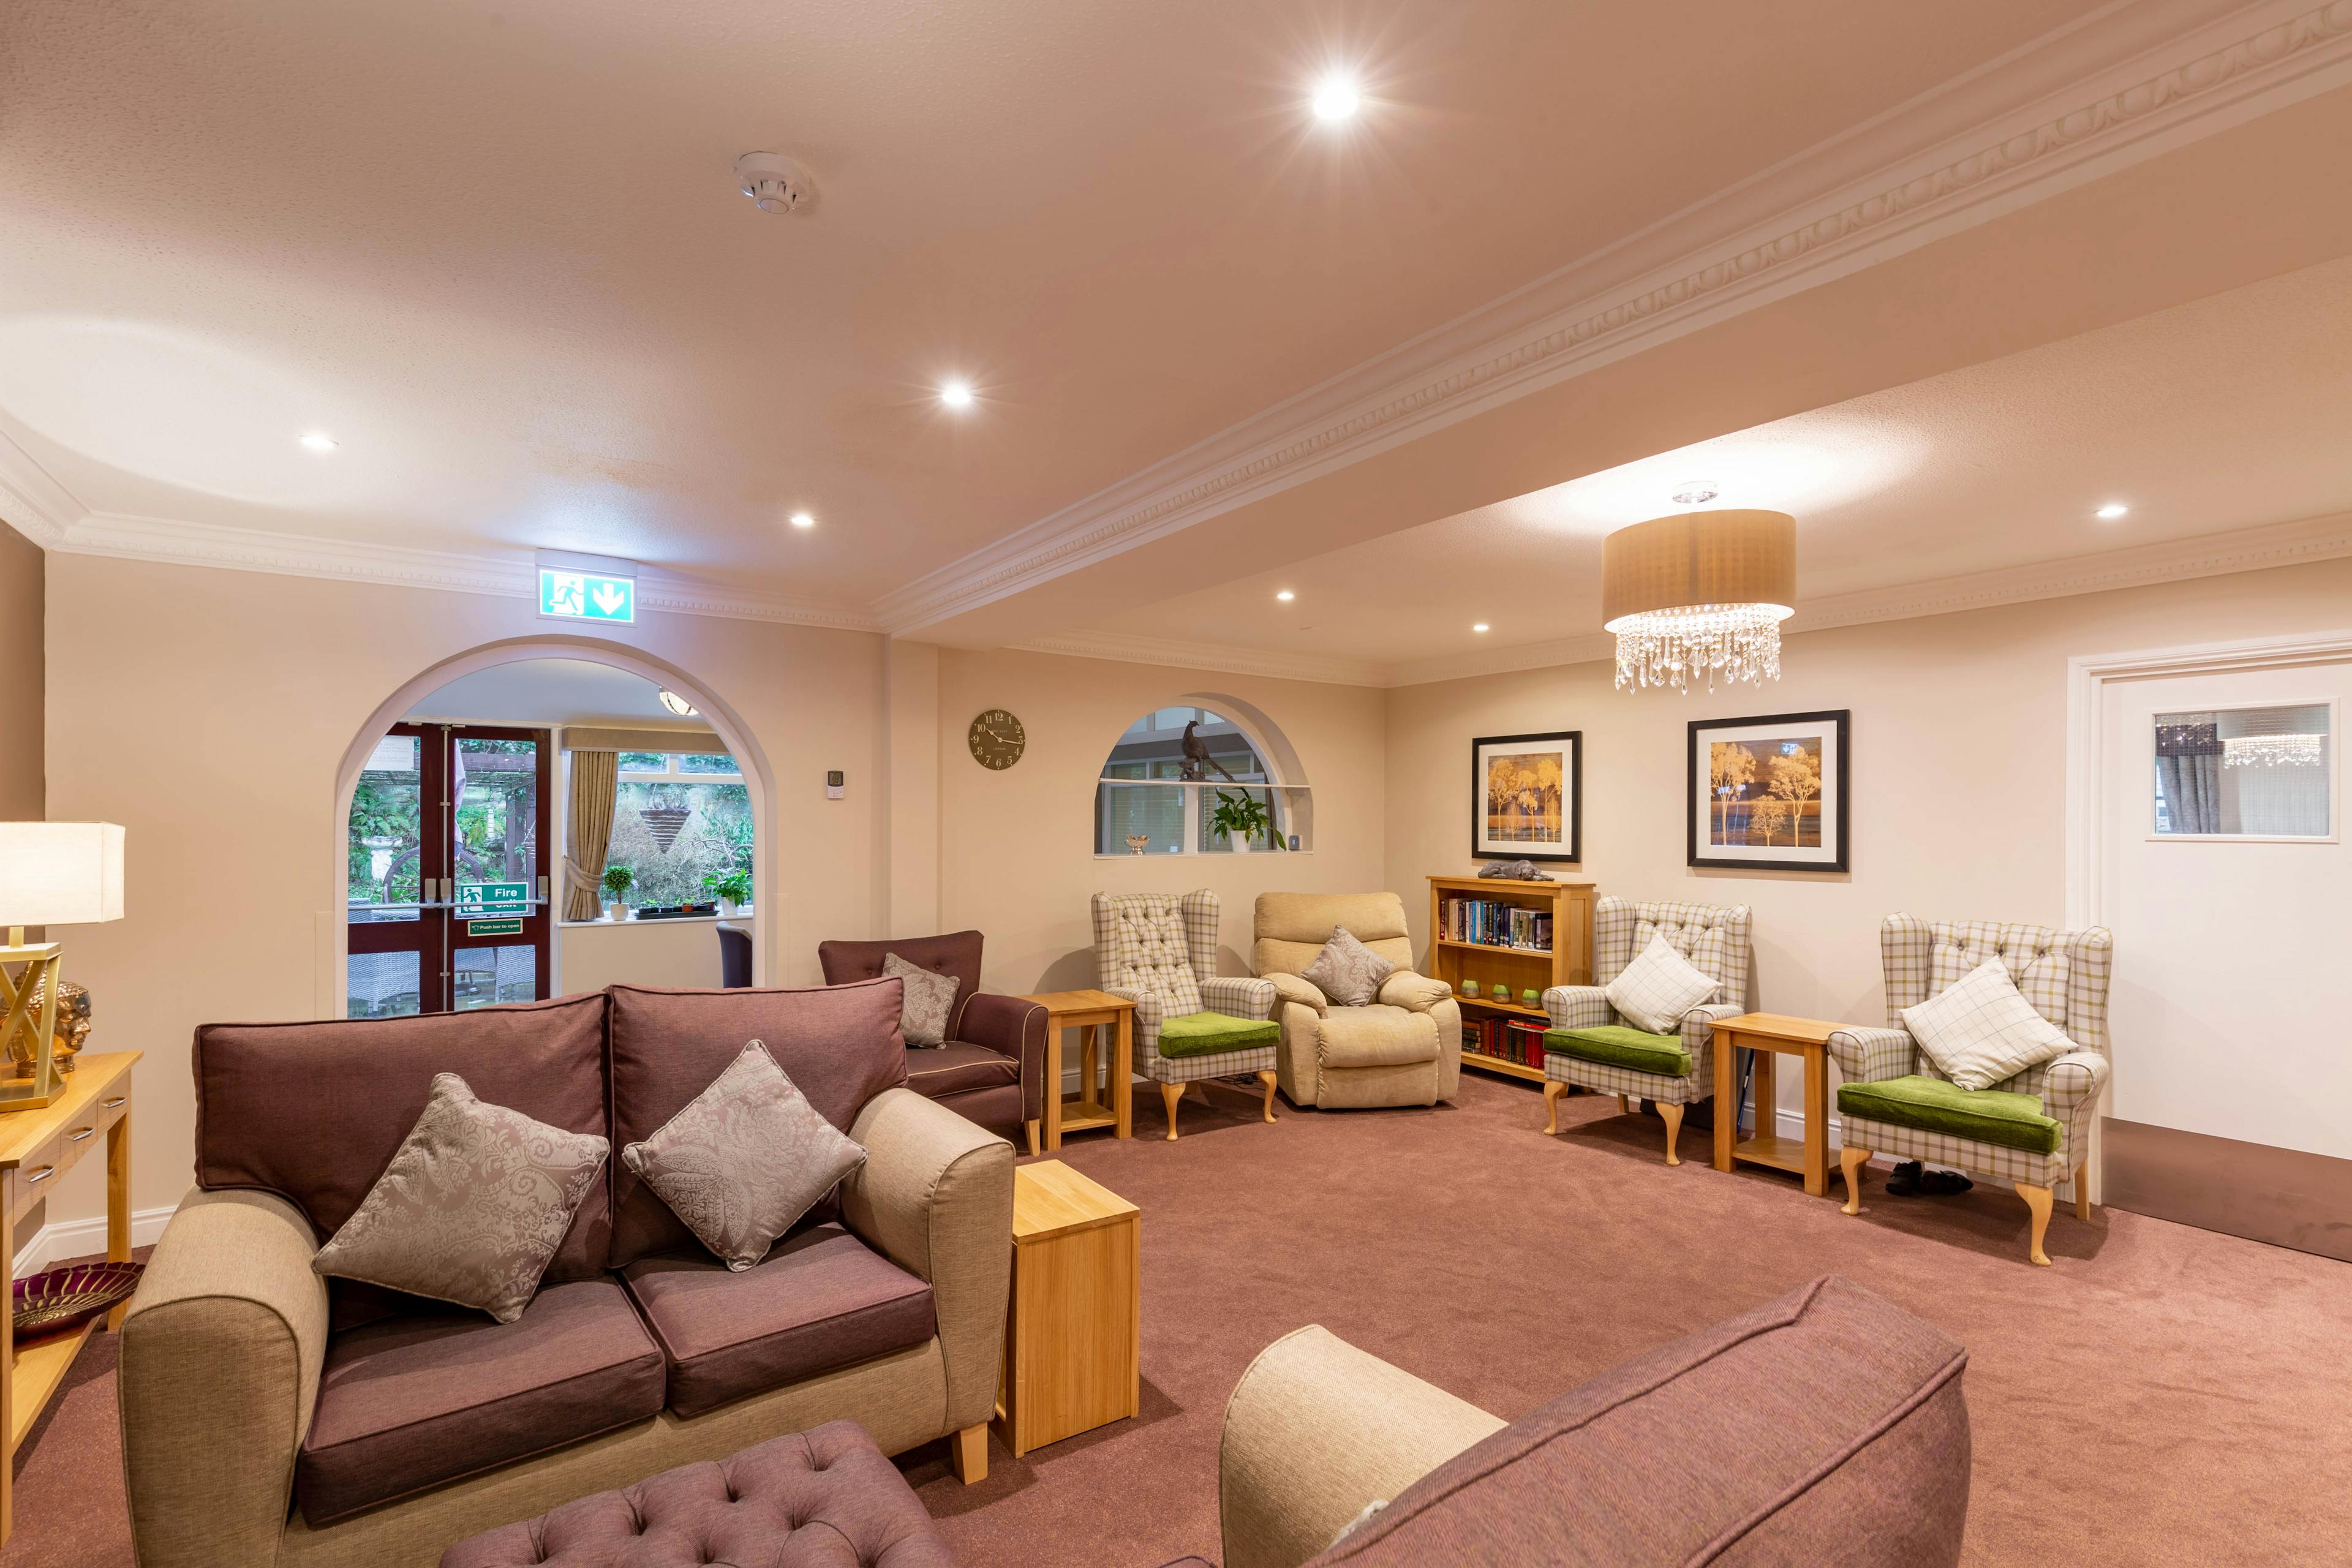 Communal Lounge at South Chowdene Care Home in Gateshead, Tyne and Wear